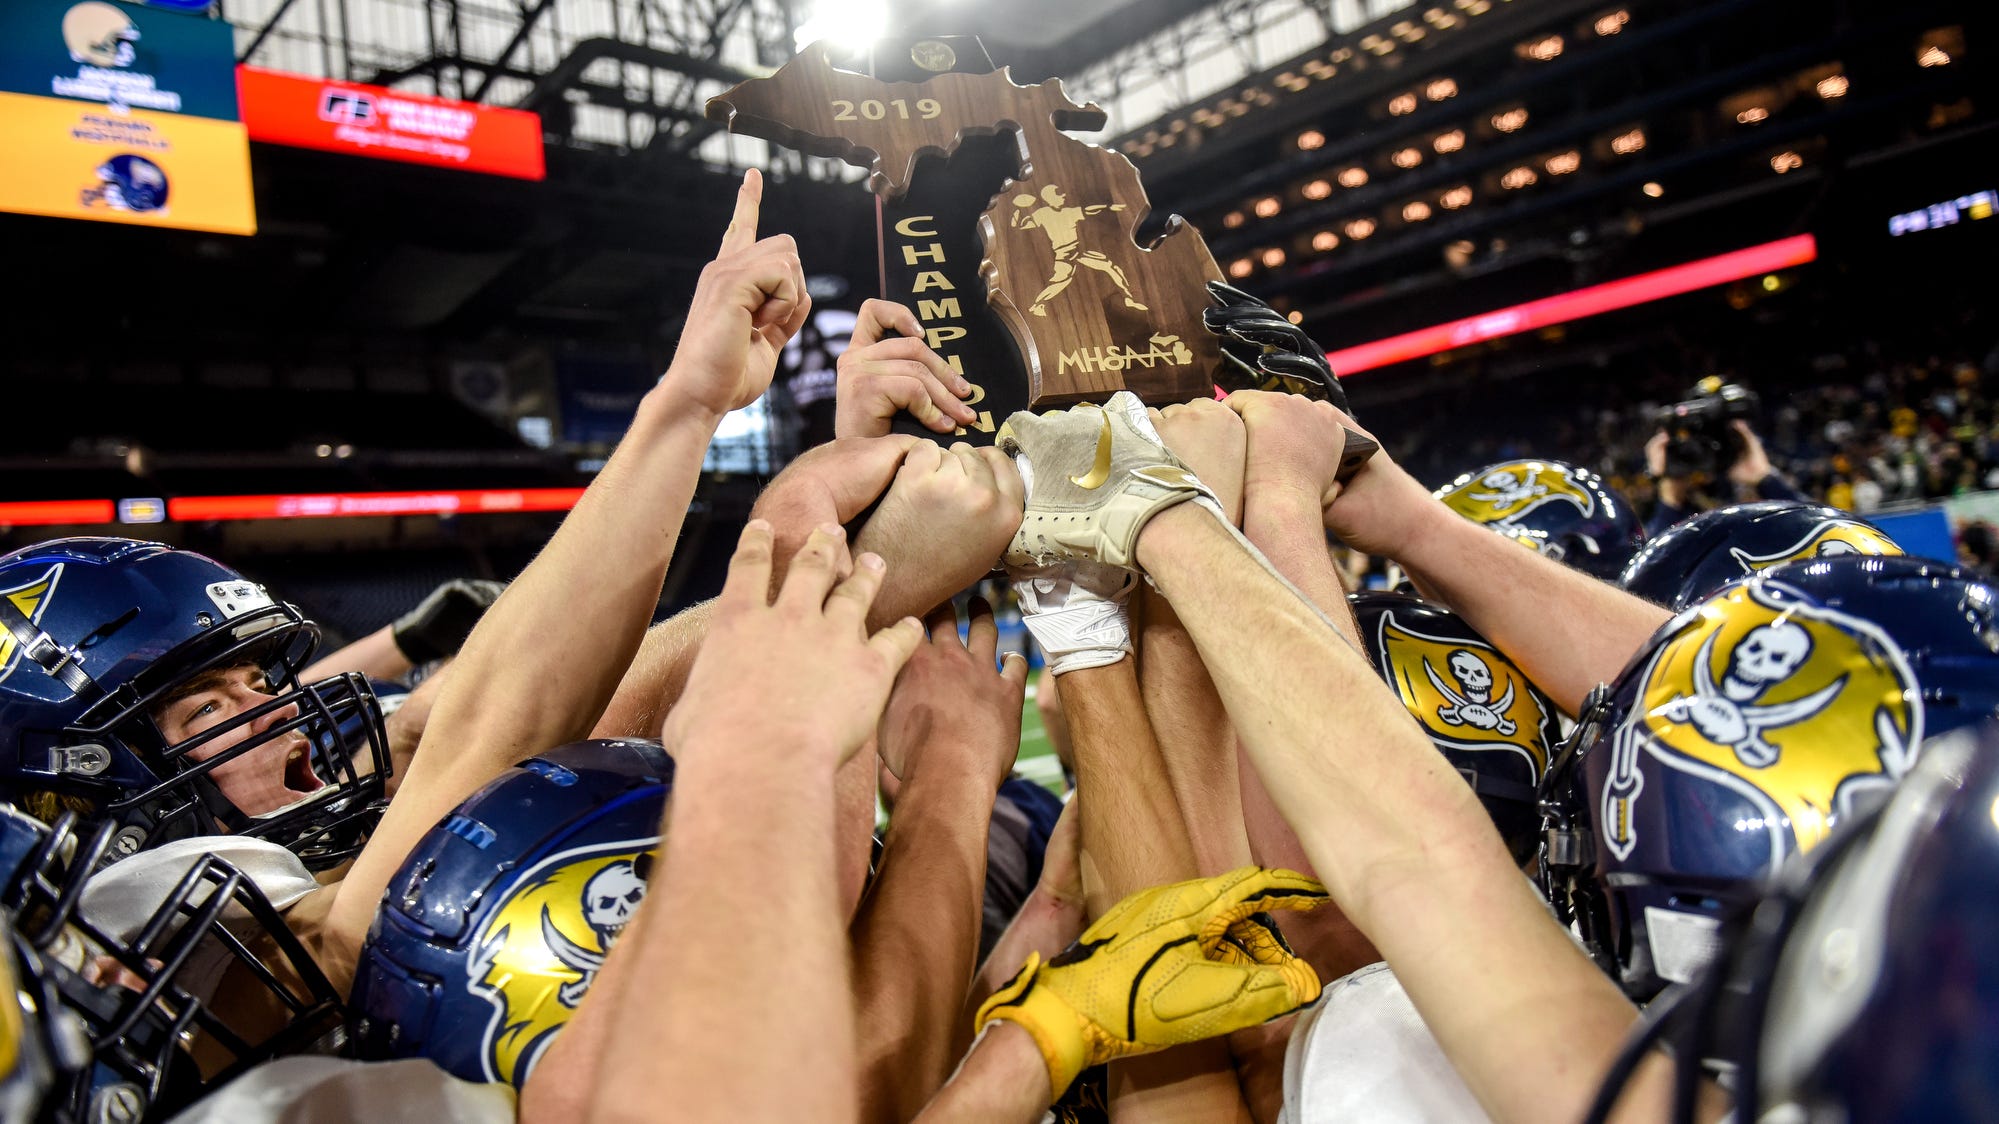 MHSAA football state finals to be played at Ford Field